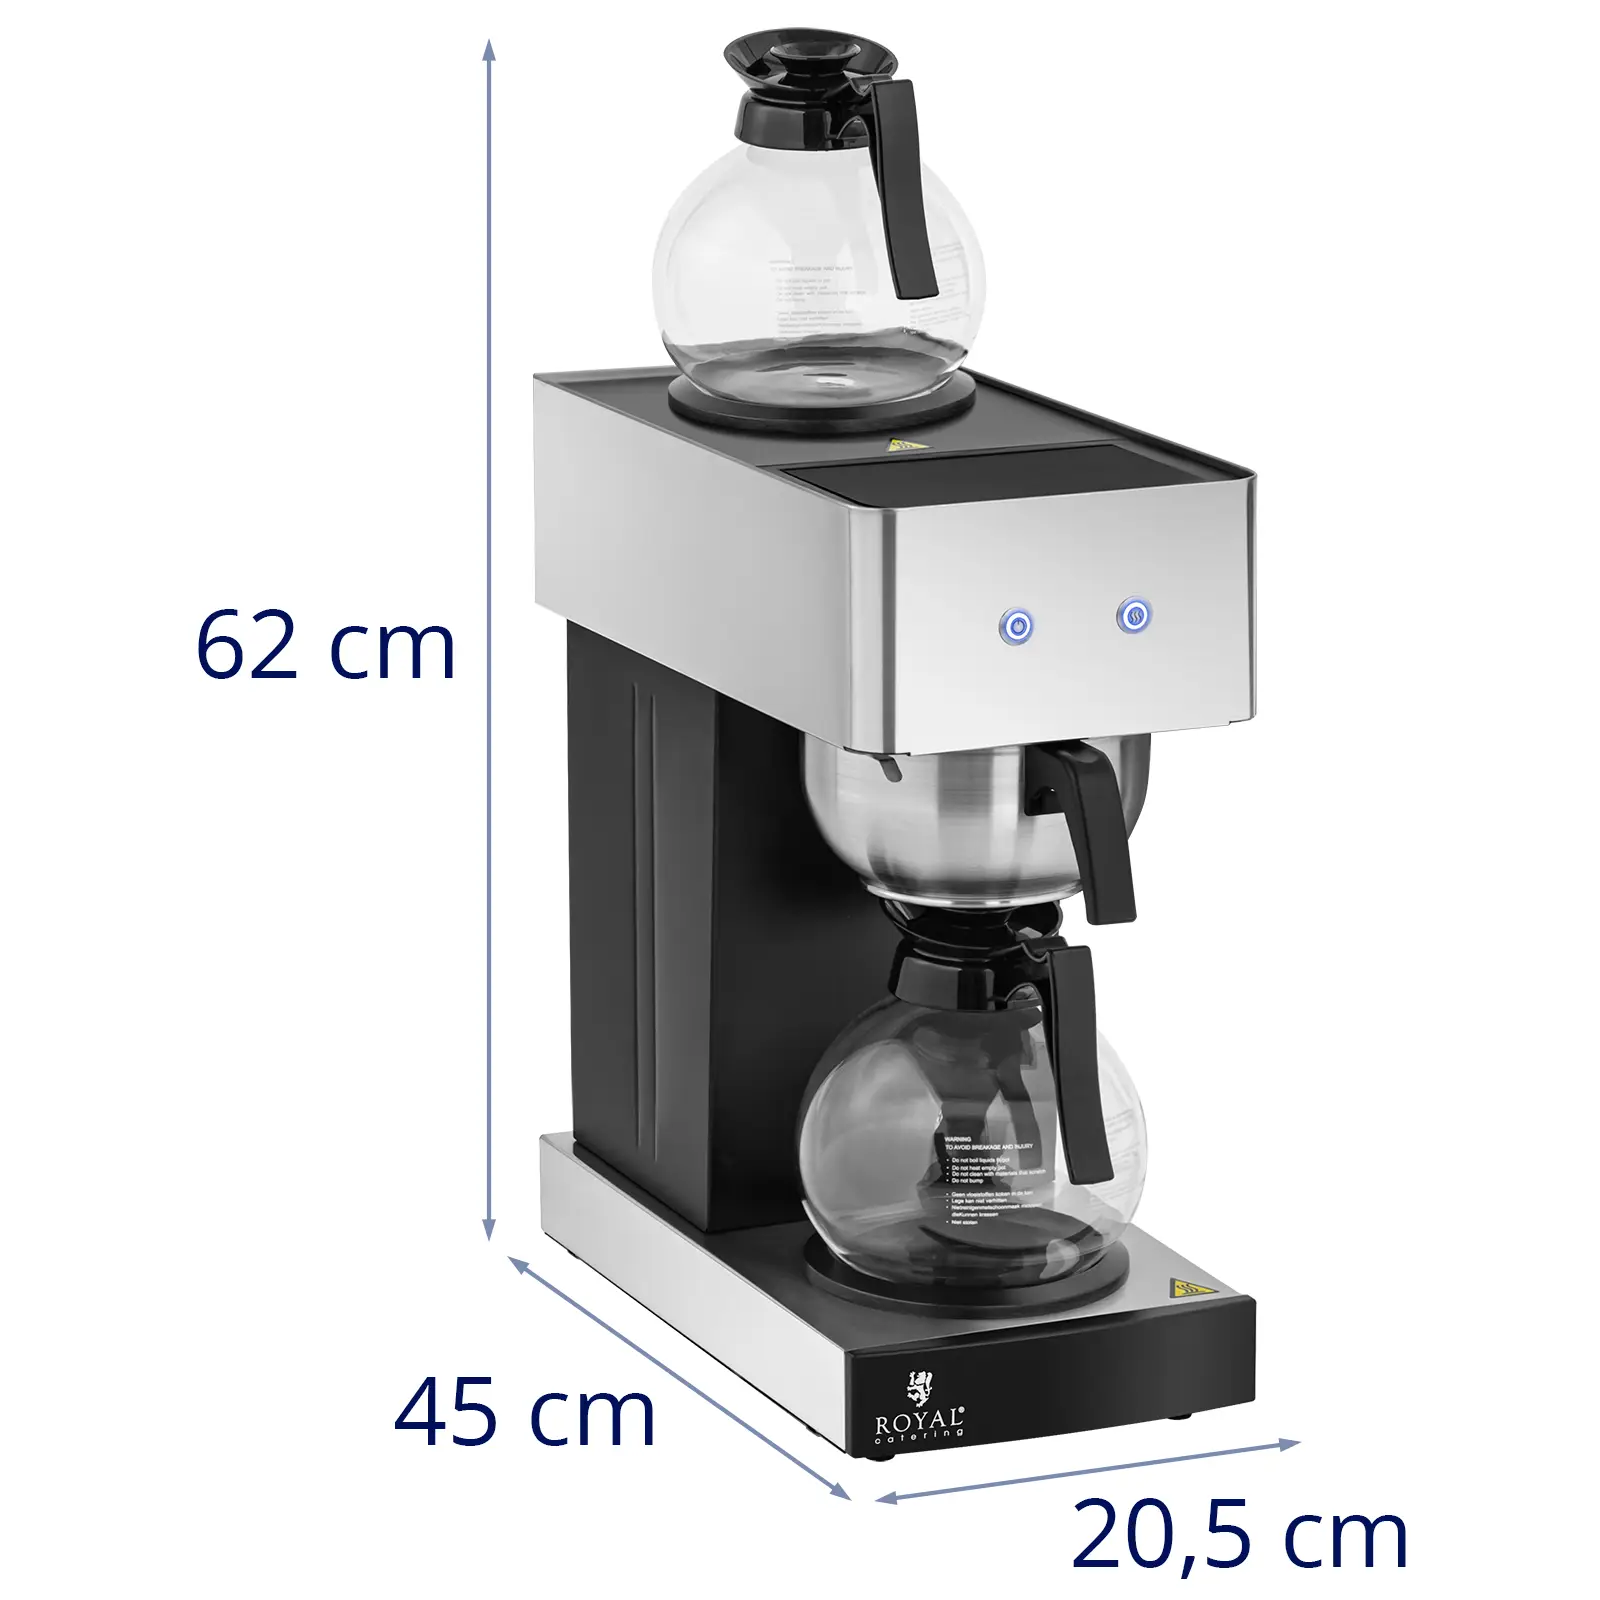 Filter coffee maker - 2 x 1.8 L - 2 hot plates - incl. 2 glass containers